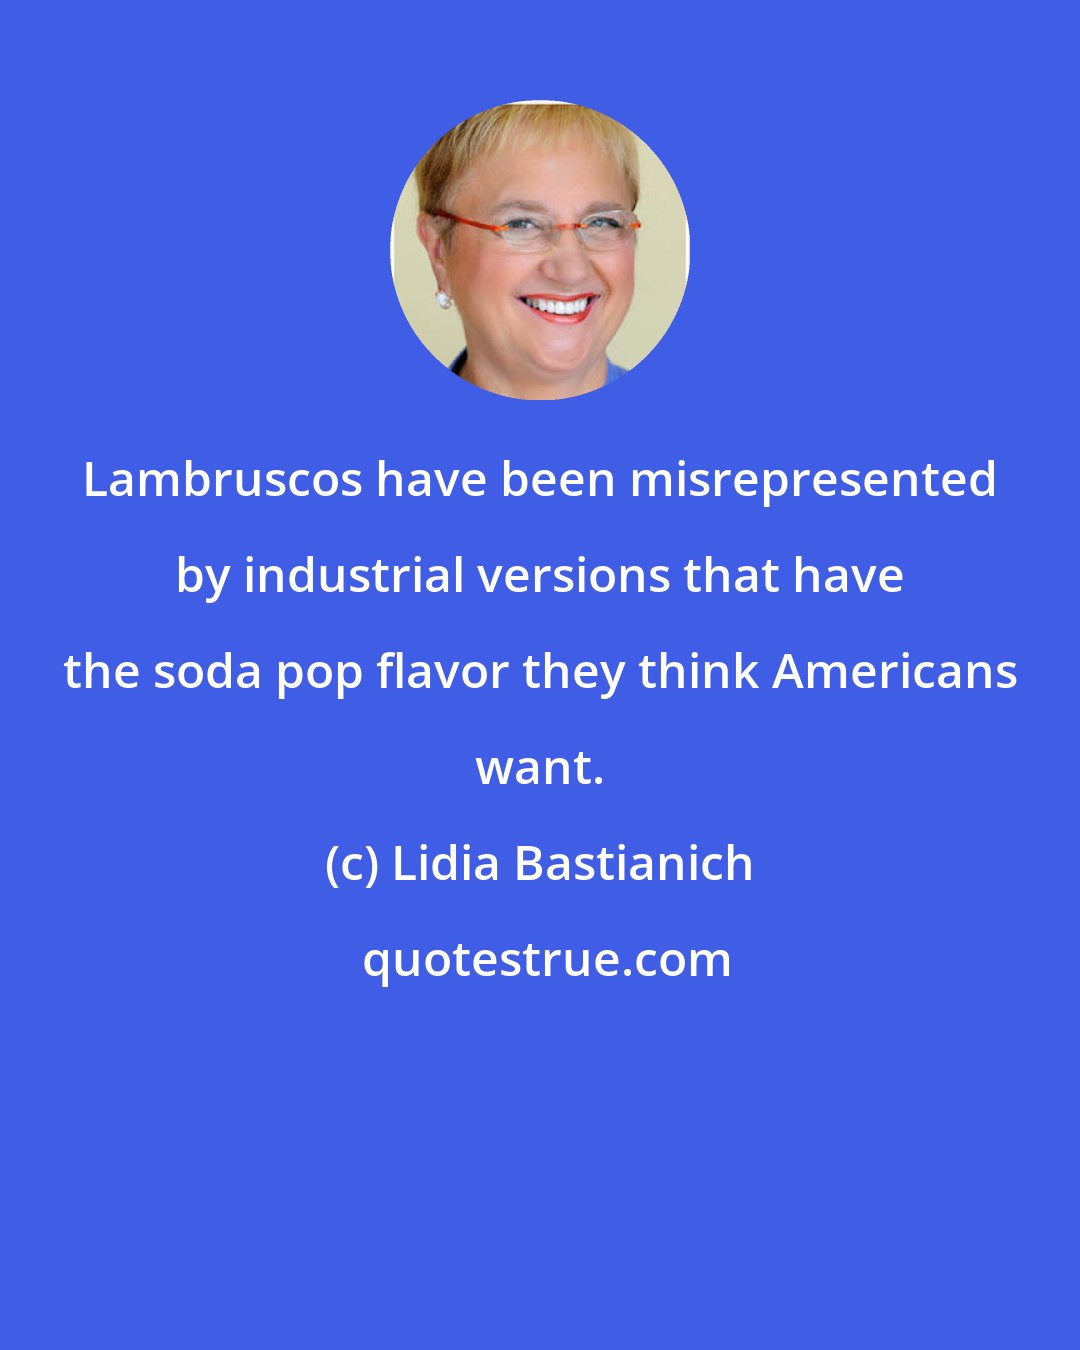 Lidia Bastianich: Lambruscos have been misrepresented by industrial versions that have the soda pop flavor they think Americans want.